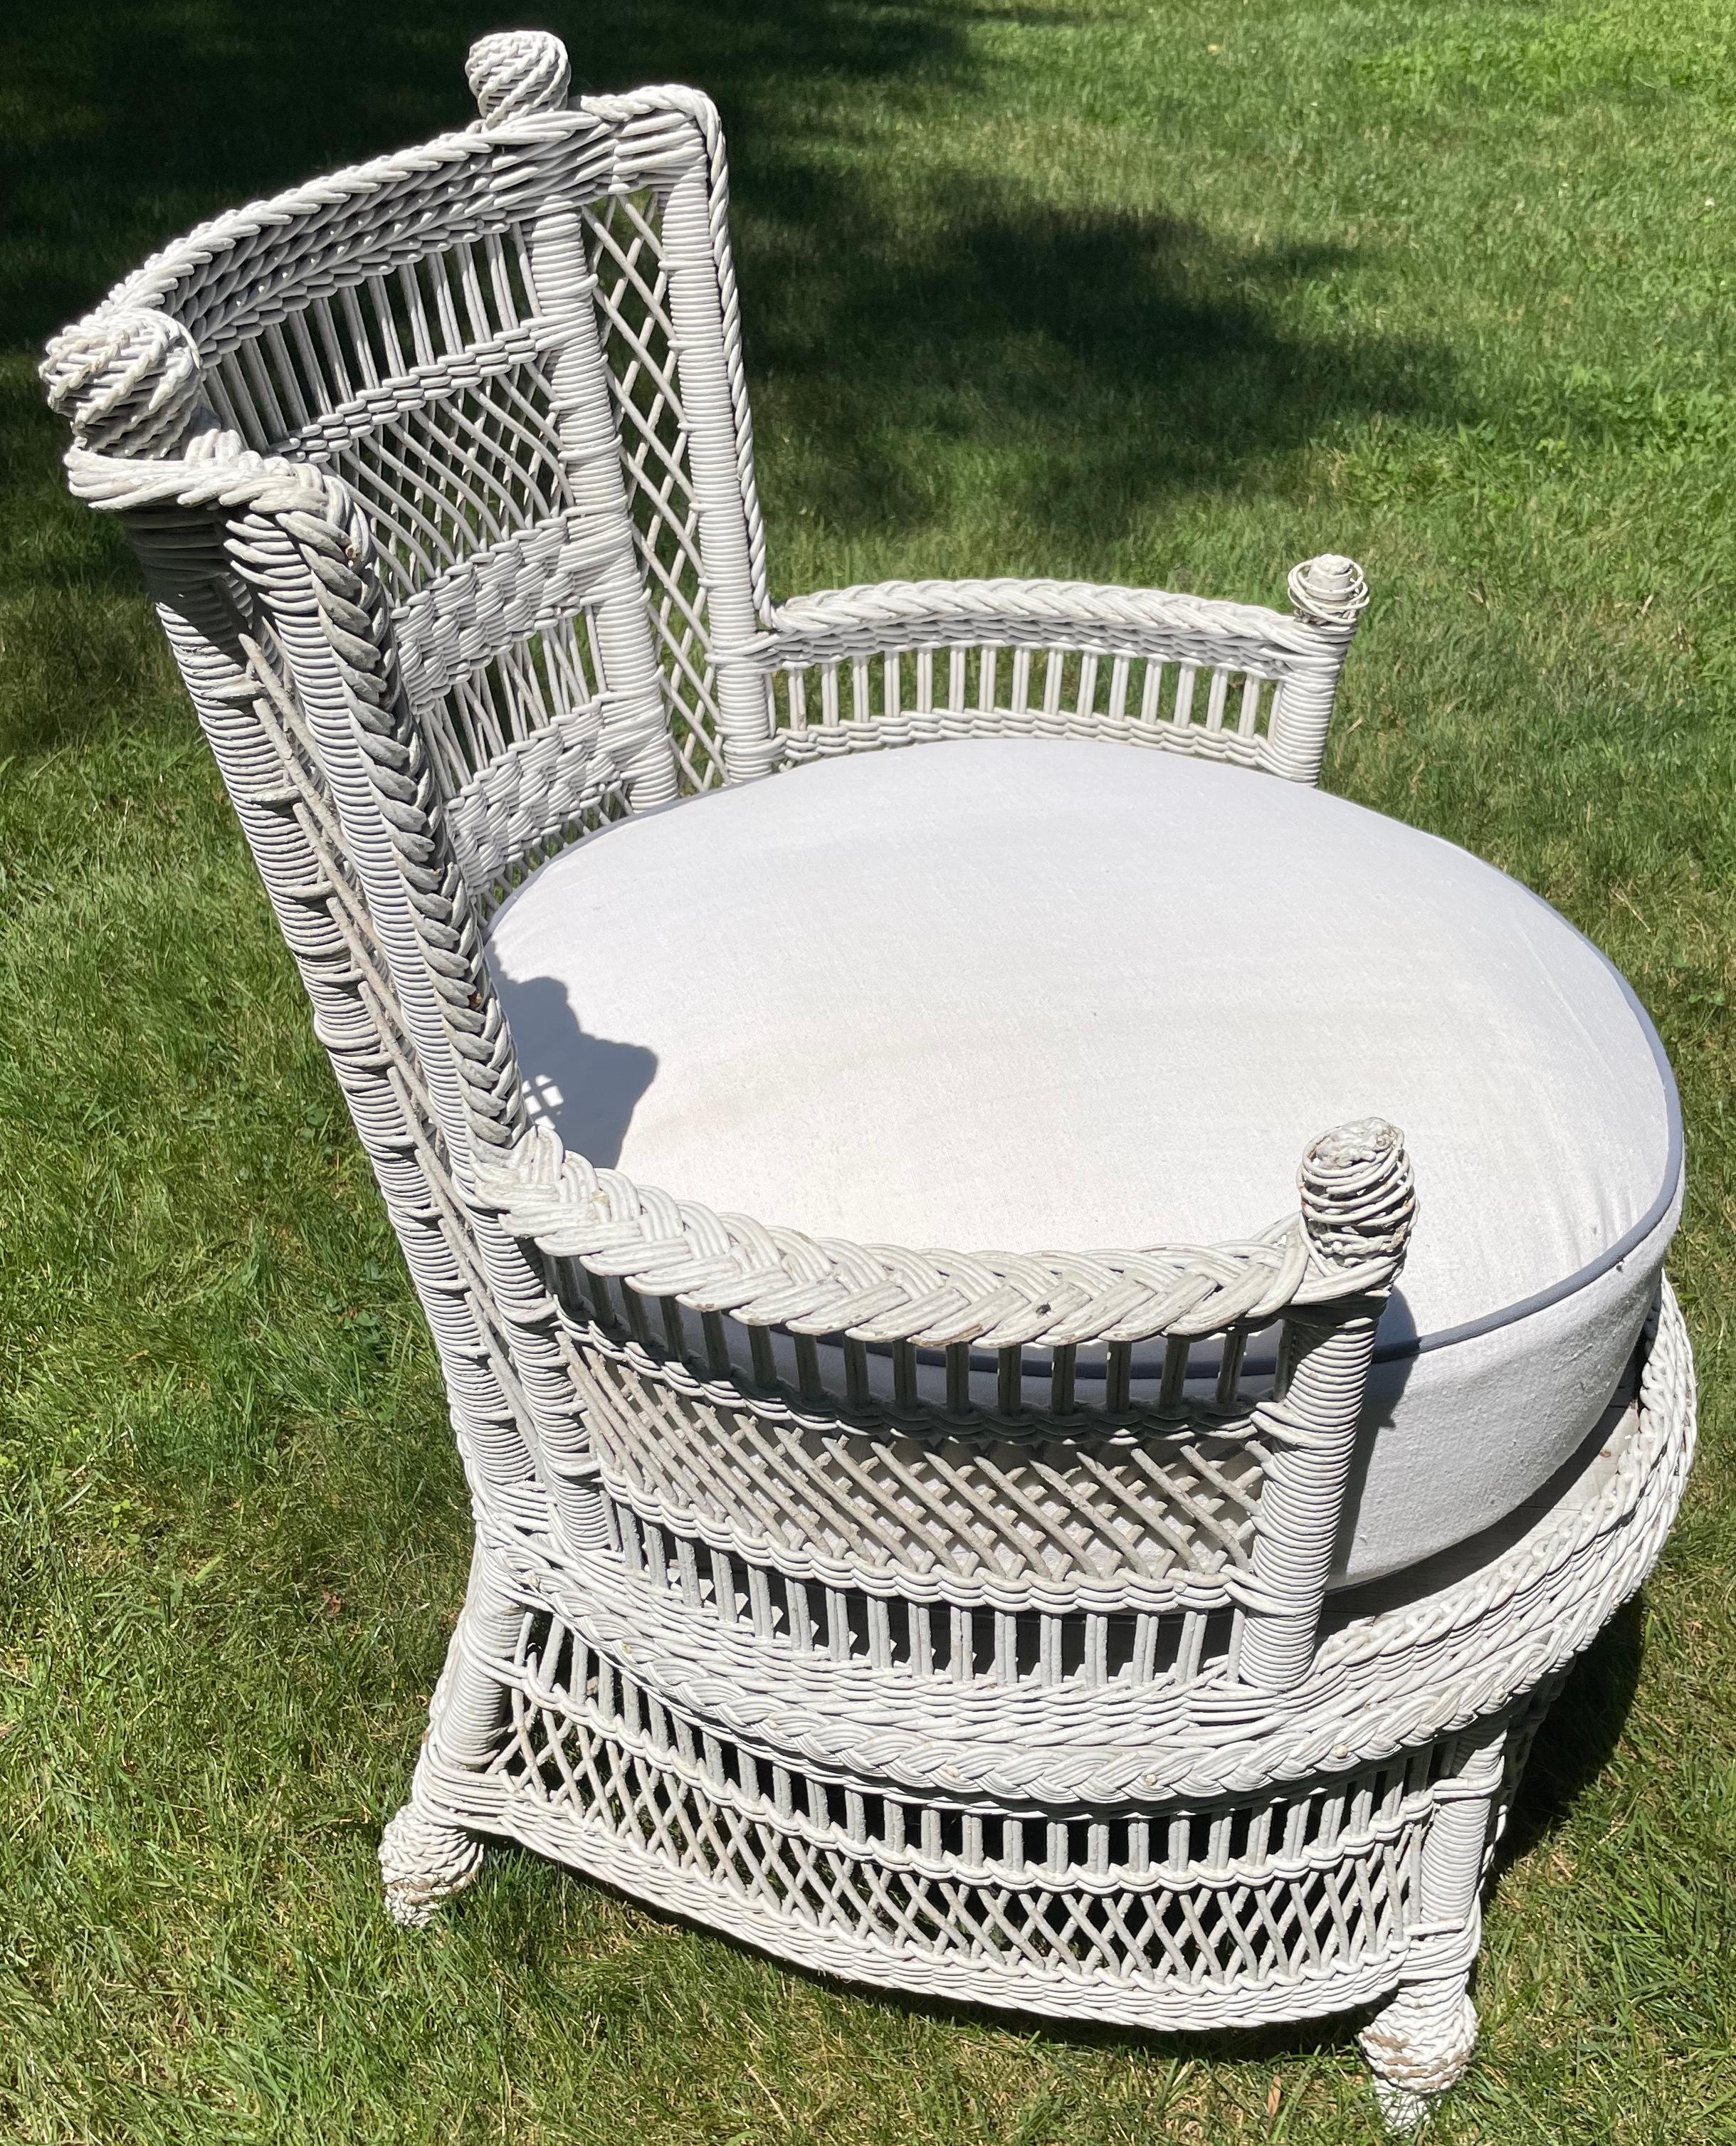 Aesthetic movement white wicker chair. American turn of the century white painted wicker circular arm chair with rounded sides coiled wicker ball finials and thick down and feather Belgian seat cushion in the Aesthetic Movement style. United States,